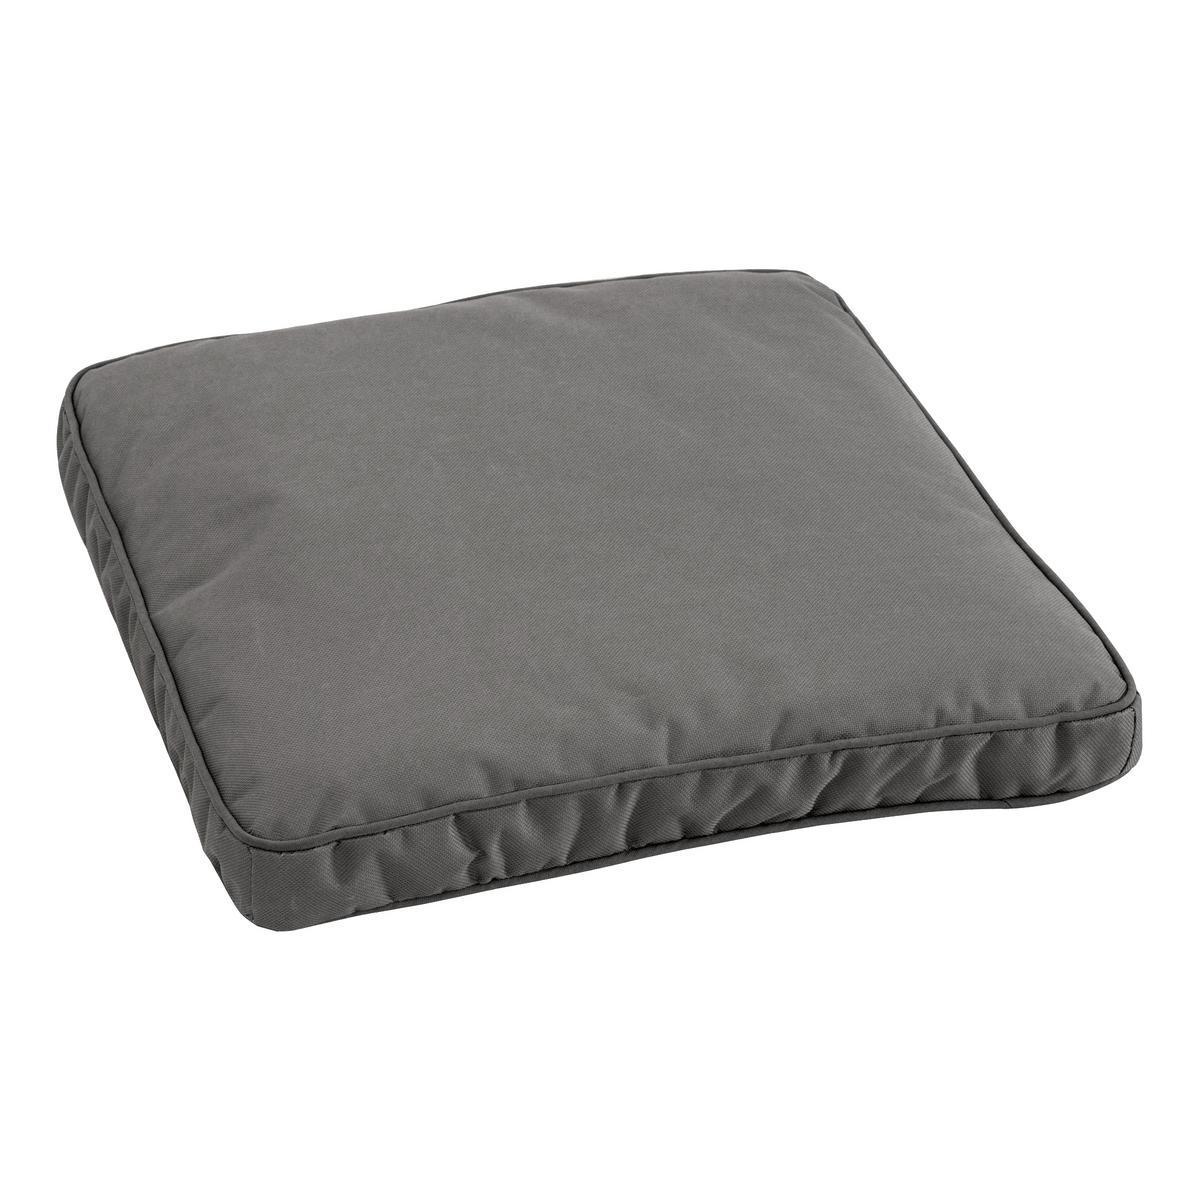 Galette de chaise - 100 % Polyester - 40 x 40 cm - Anthracite